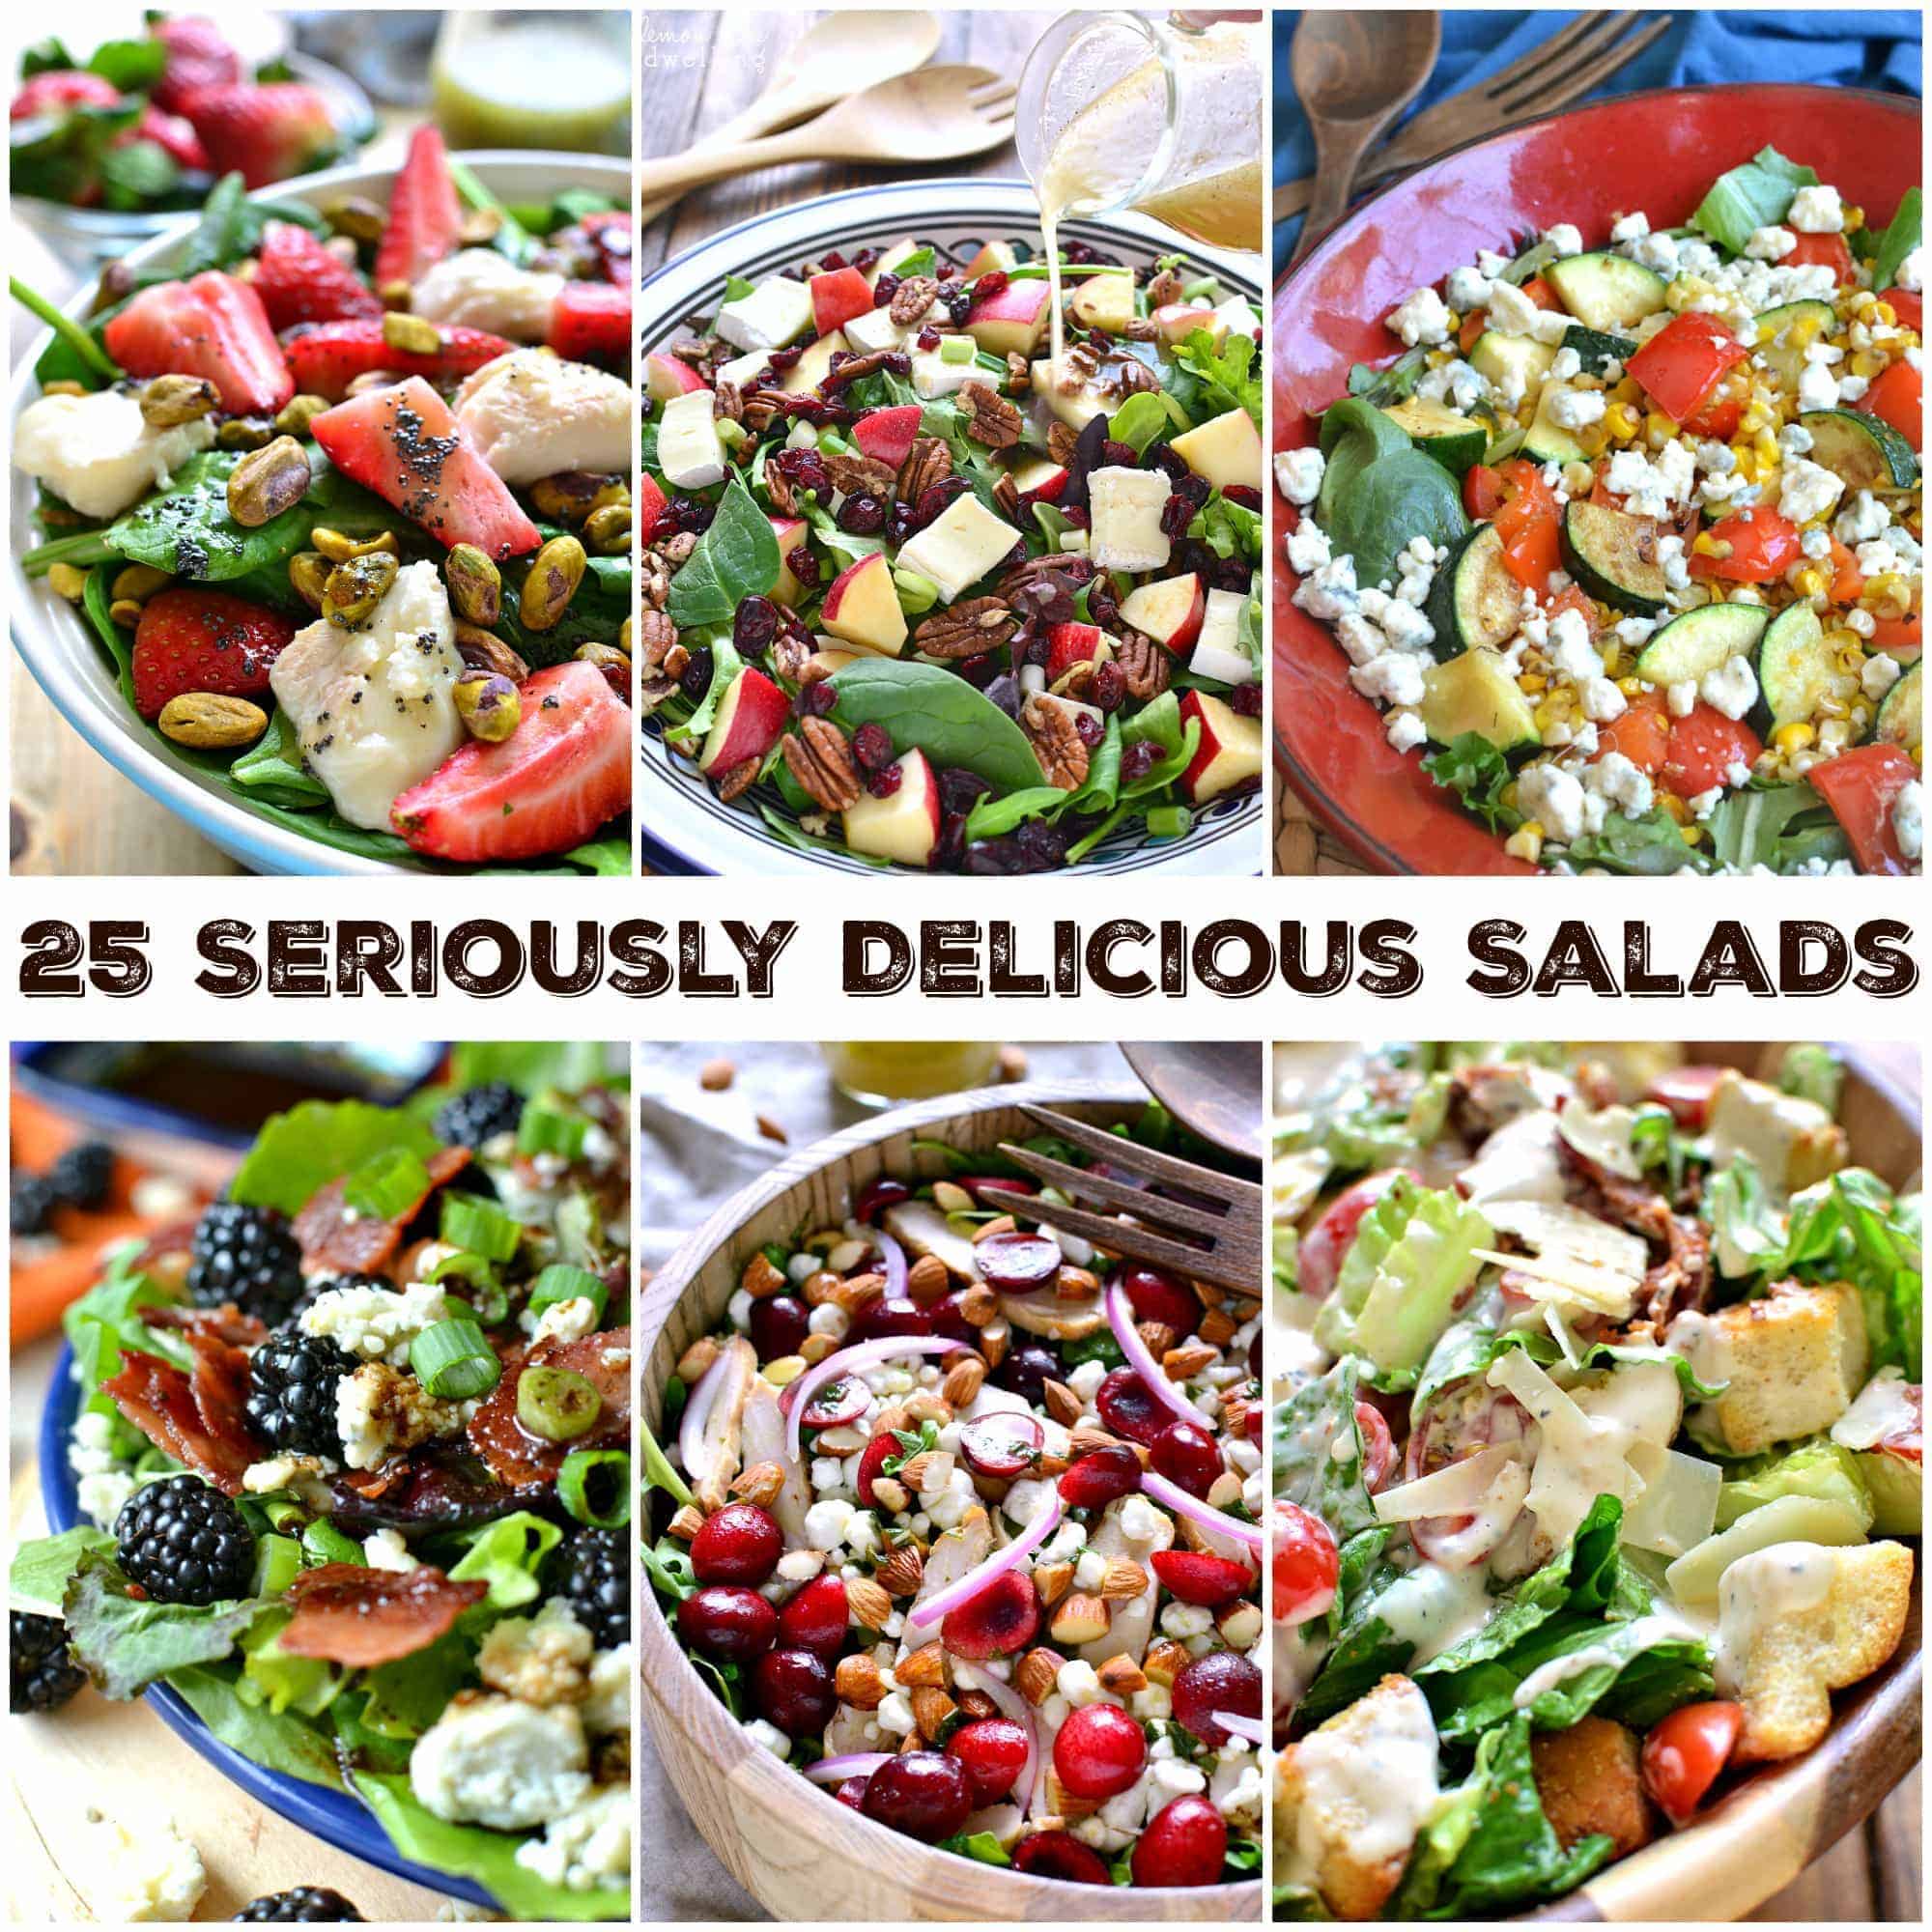 25 Seriously Delicious Salads - loaded with all the best ingredients! A salad for every taste, a perfect way to experiment with your regular salads!